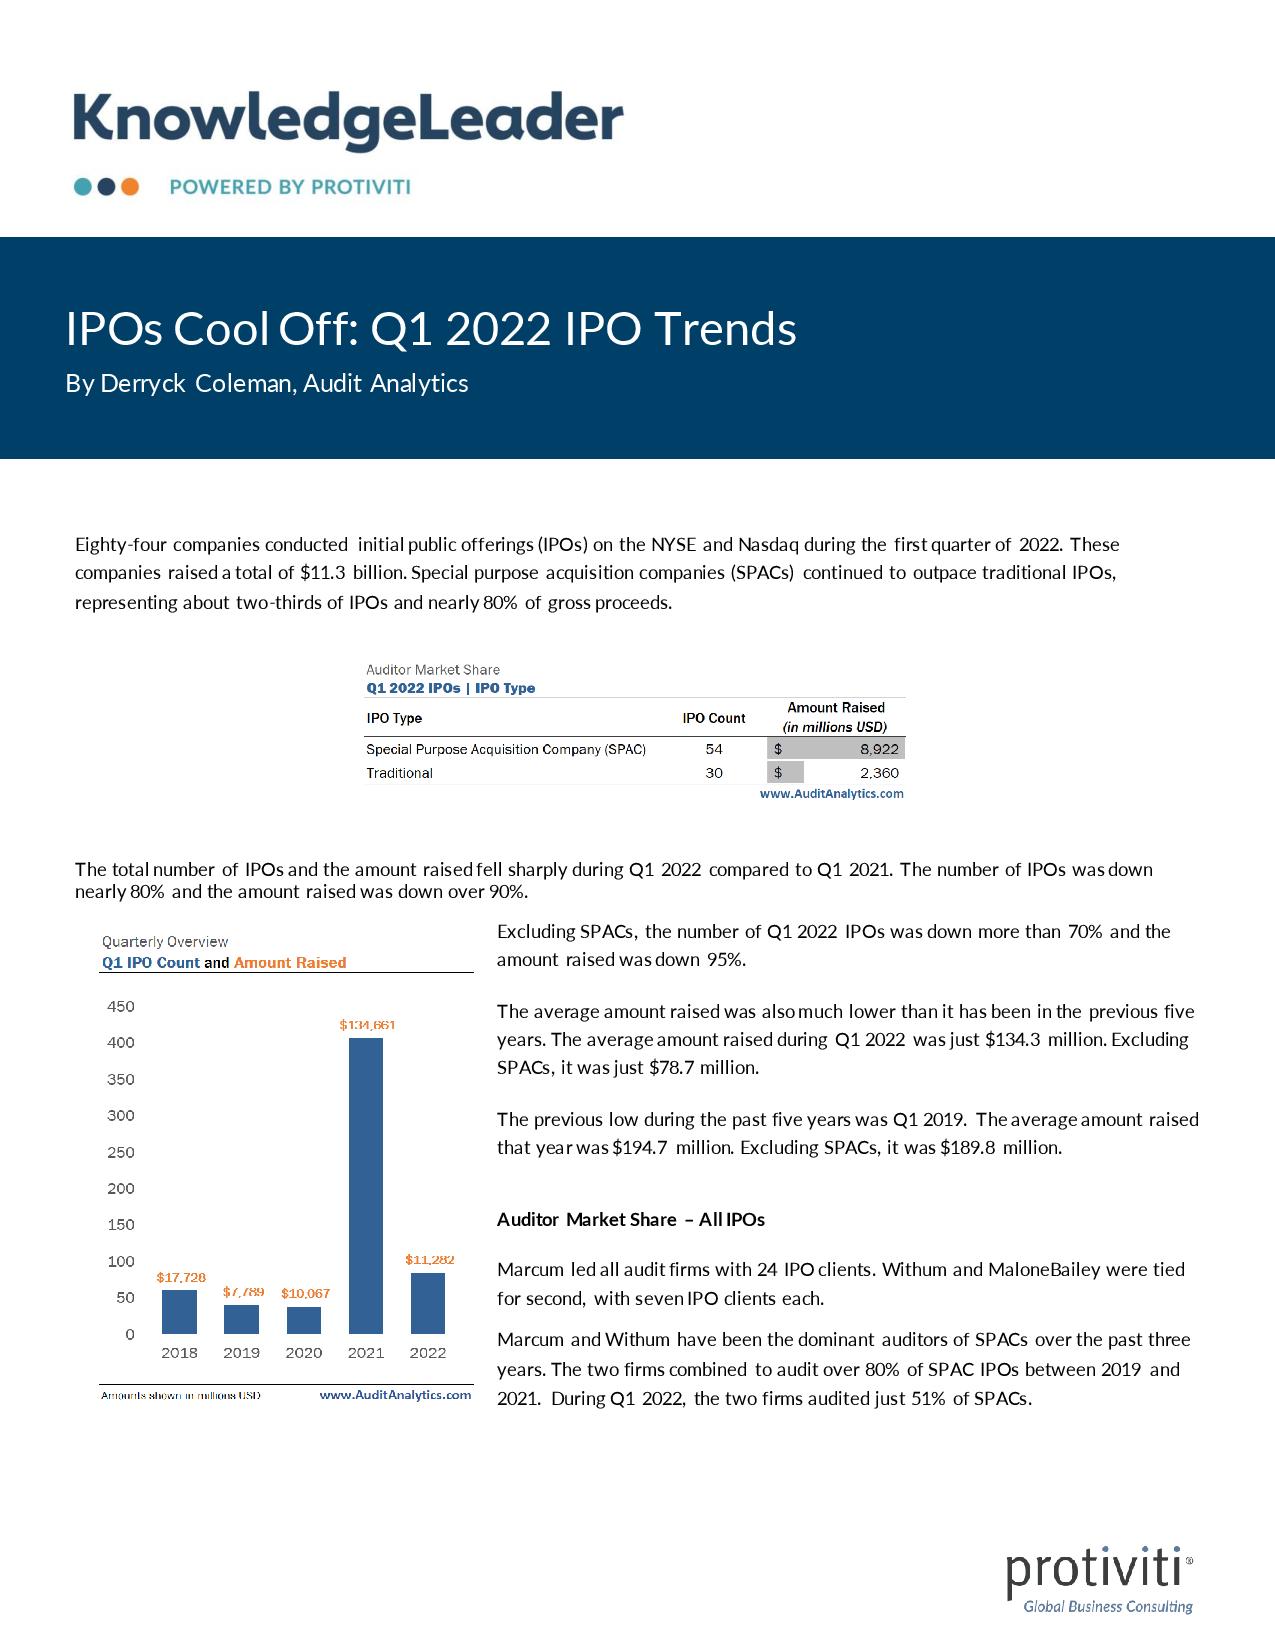 Screenshot of the first page of IPOs Cool Off Q1 2022 IPO Trends